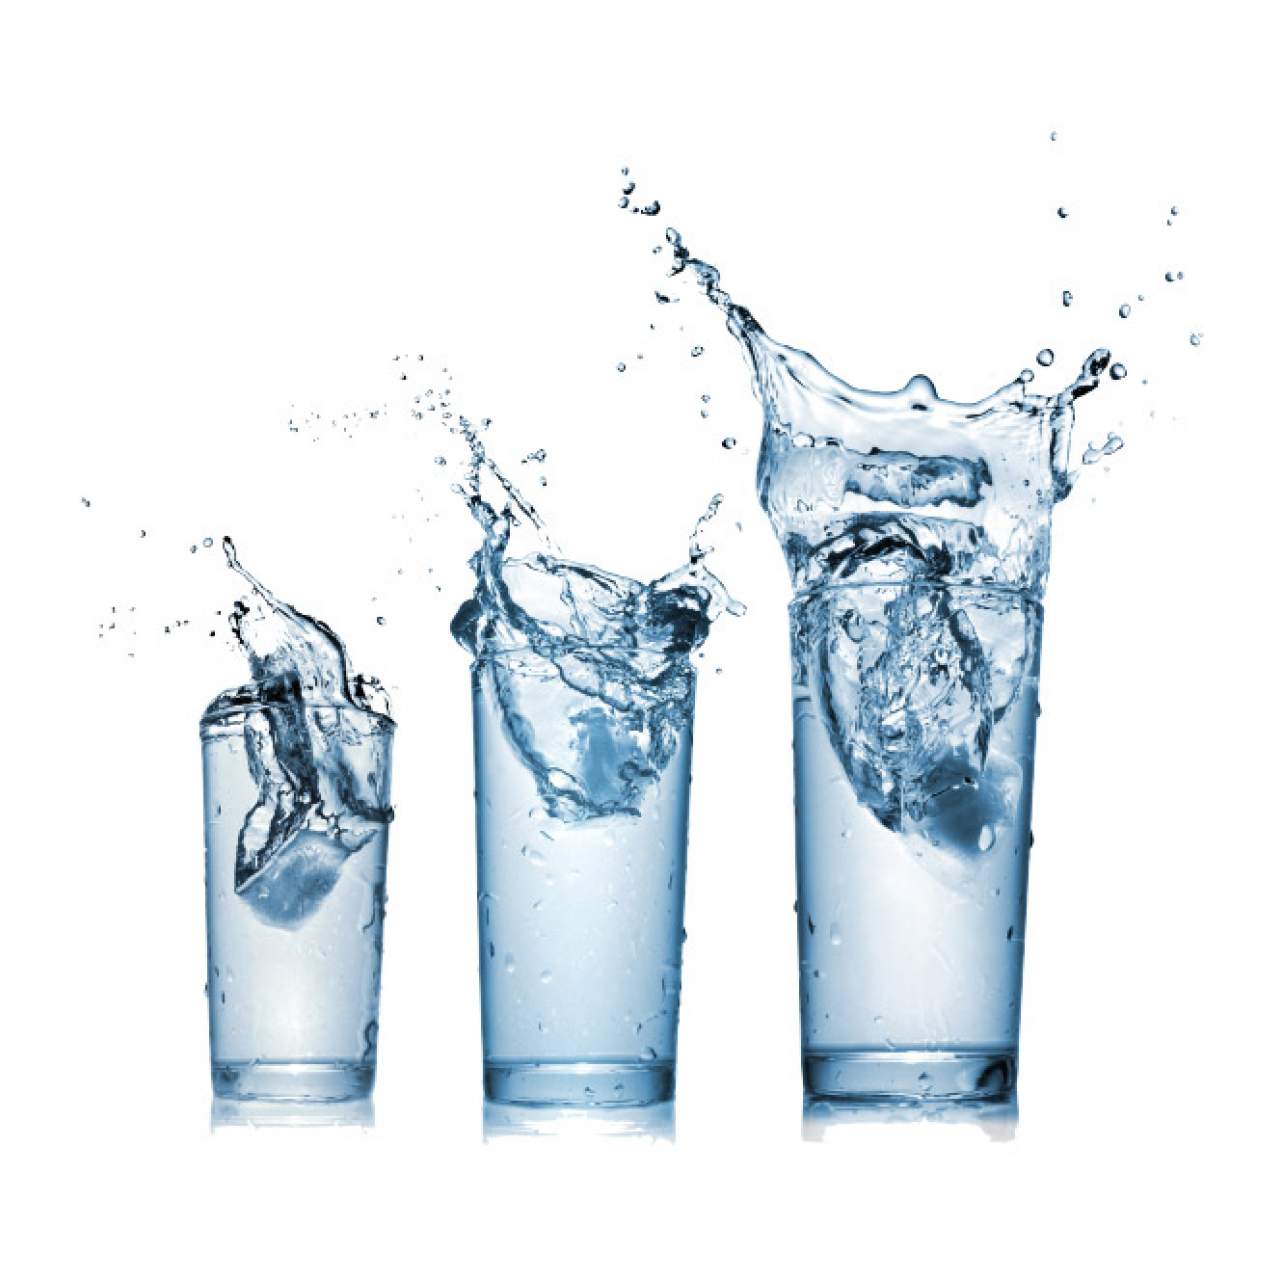 How many glasses of water should you drink everyday?